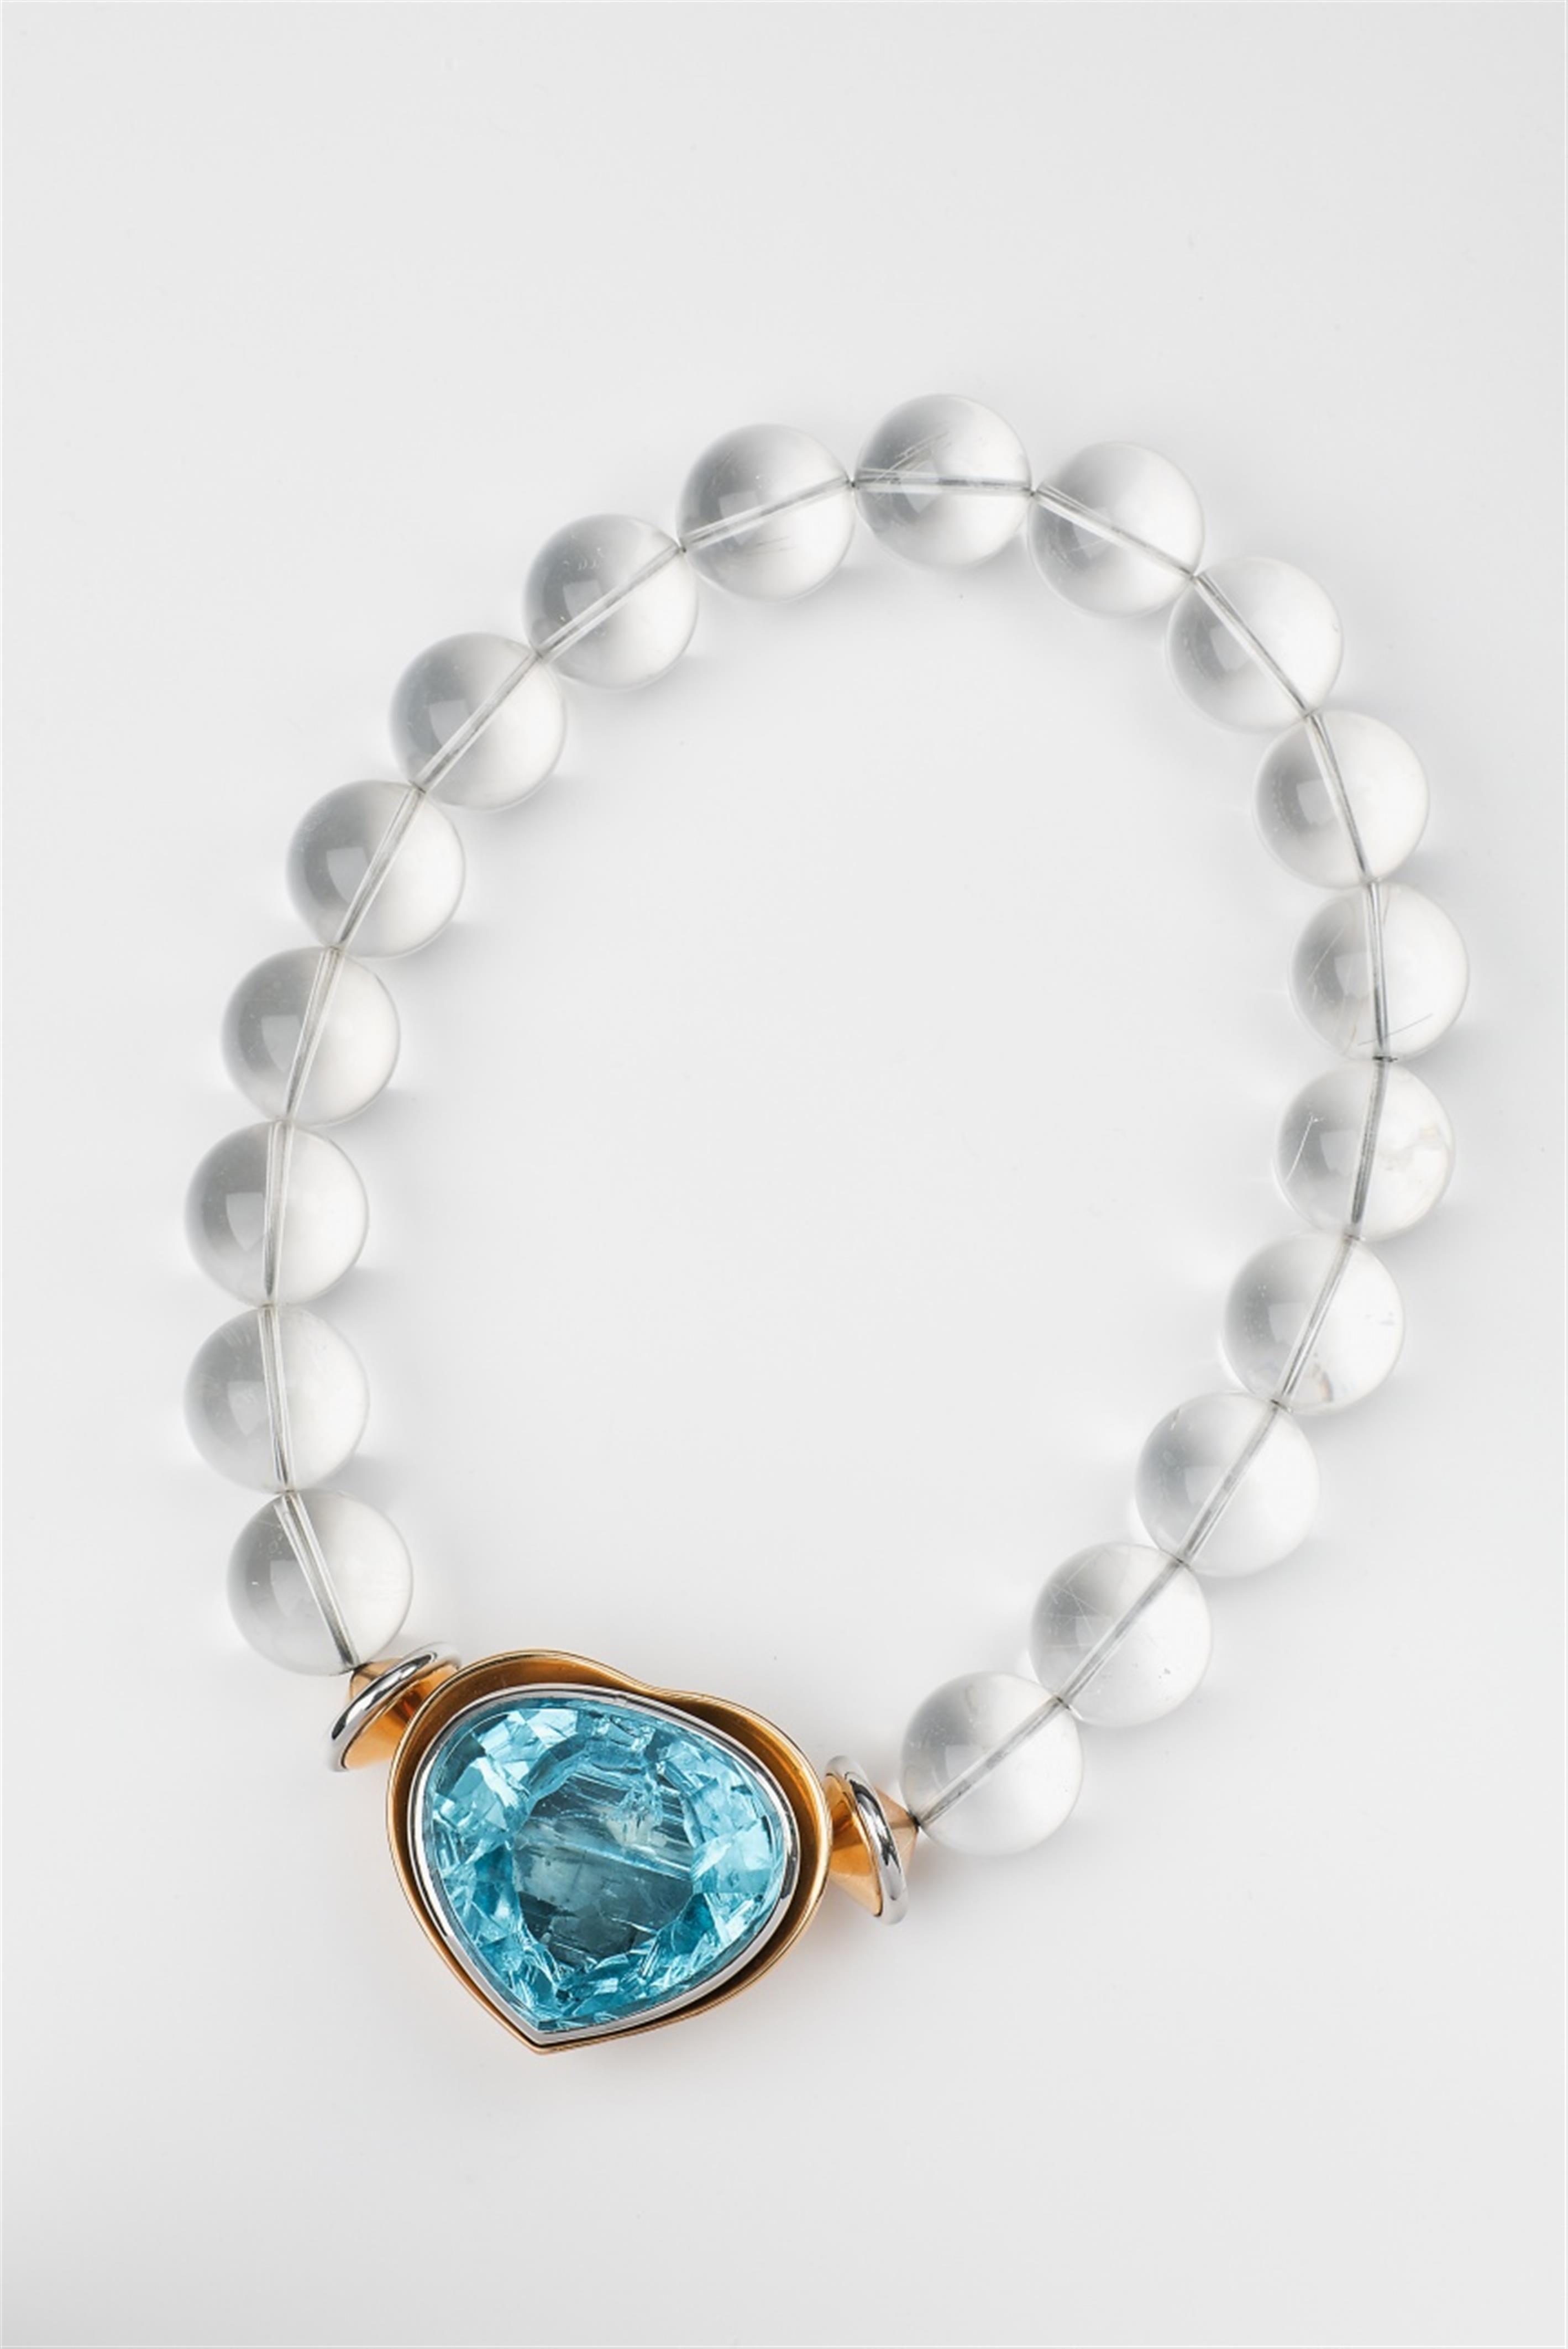 An 18k gold platinum and rock crystal necklace with an aquamarine heart - image-1